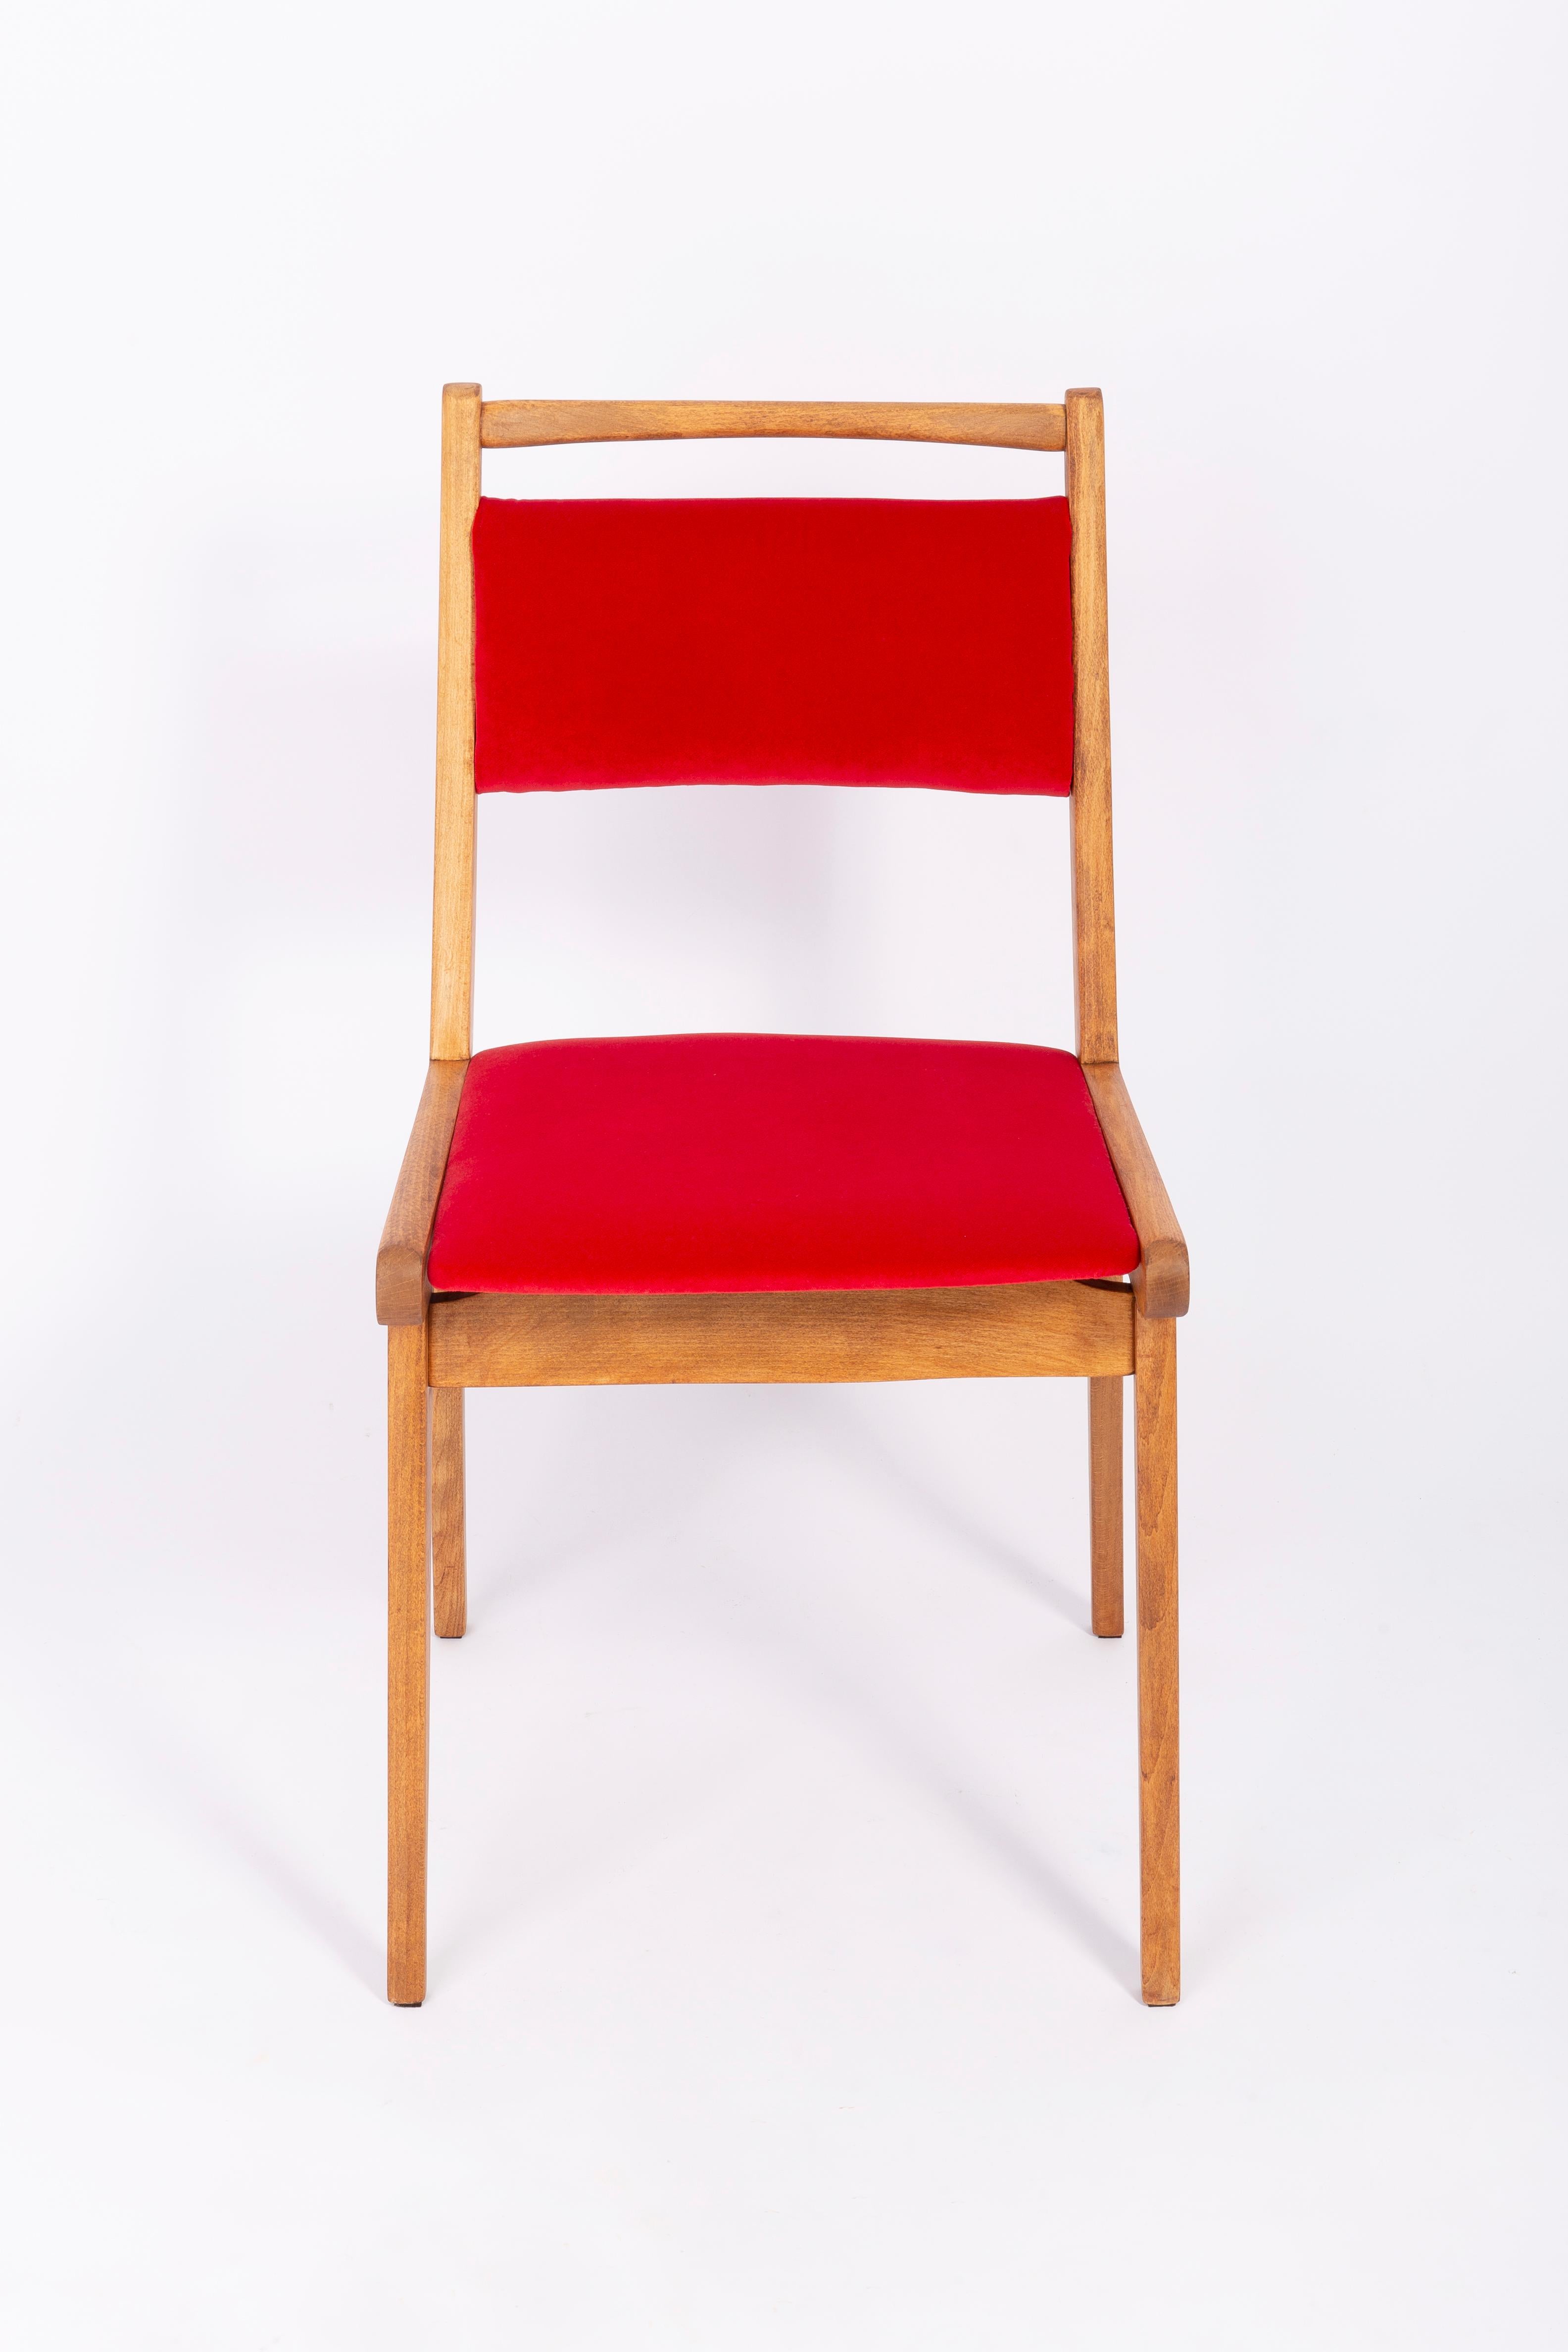 Set of Three 20th Century Blue White and Red Velvet Chairs, Poland, 1960s For Sale 8